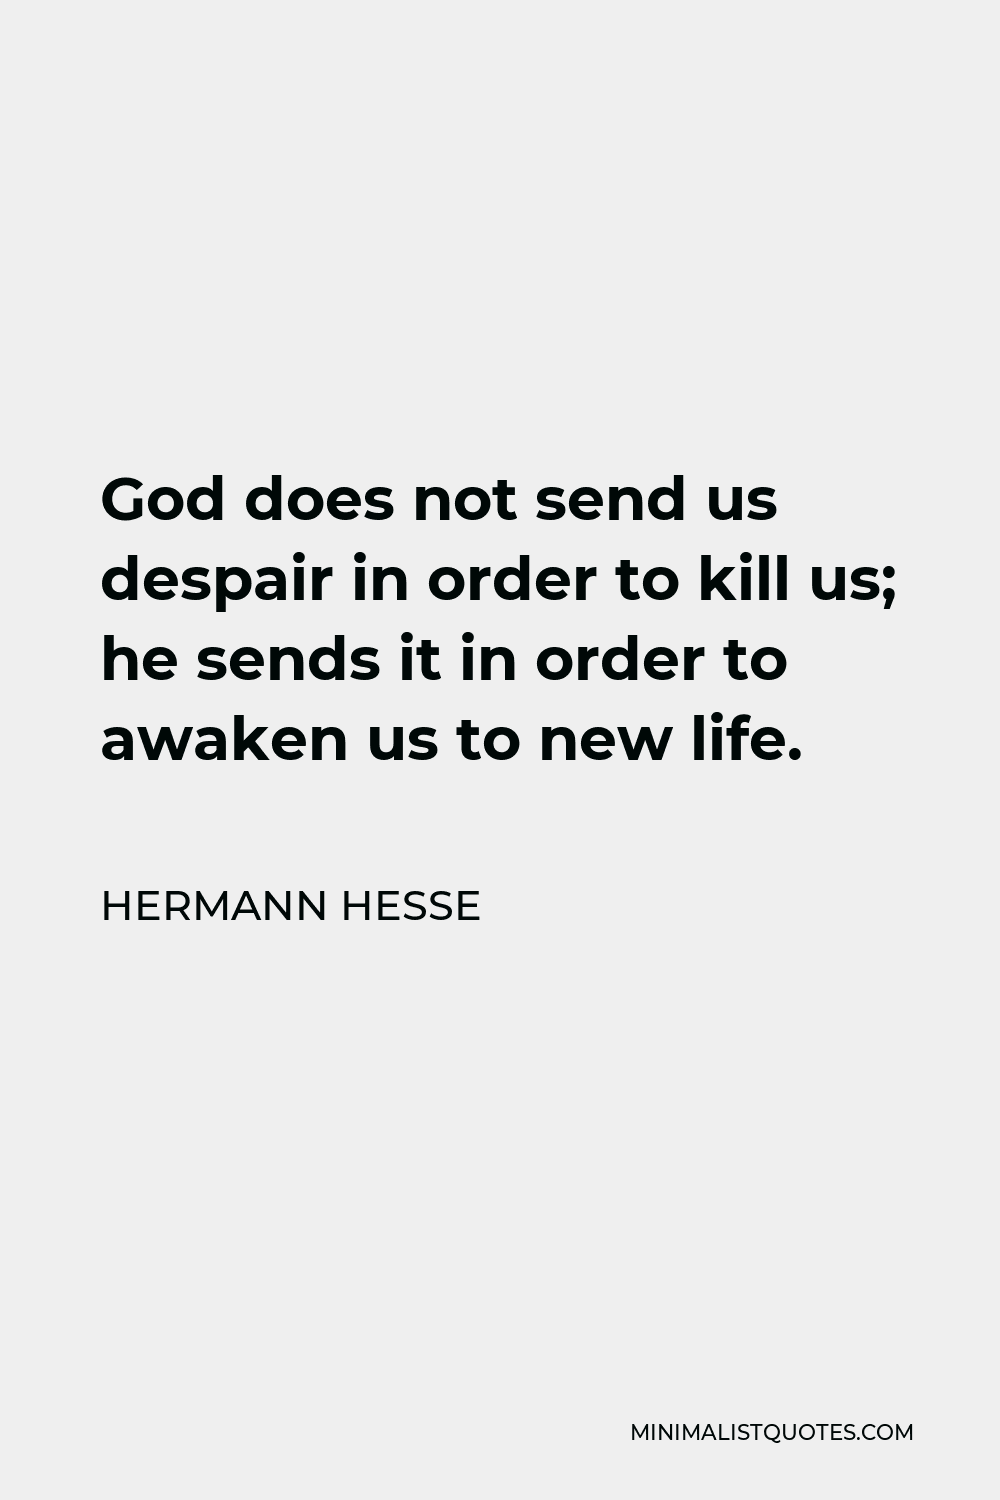 Hermann Hesse Quote - God does not send us despair in order to kill us; he sends it in order to awaken us to new life.